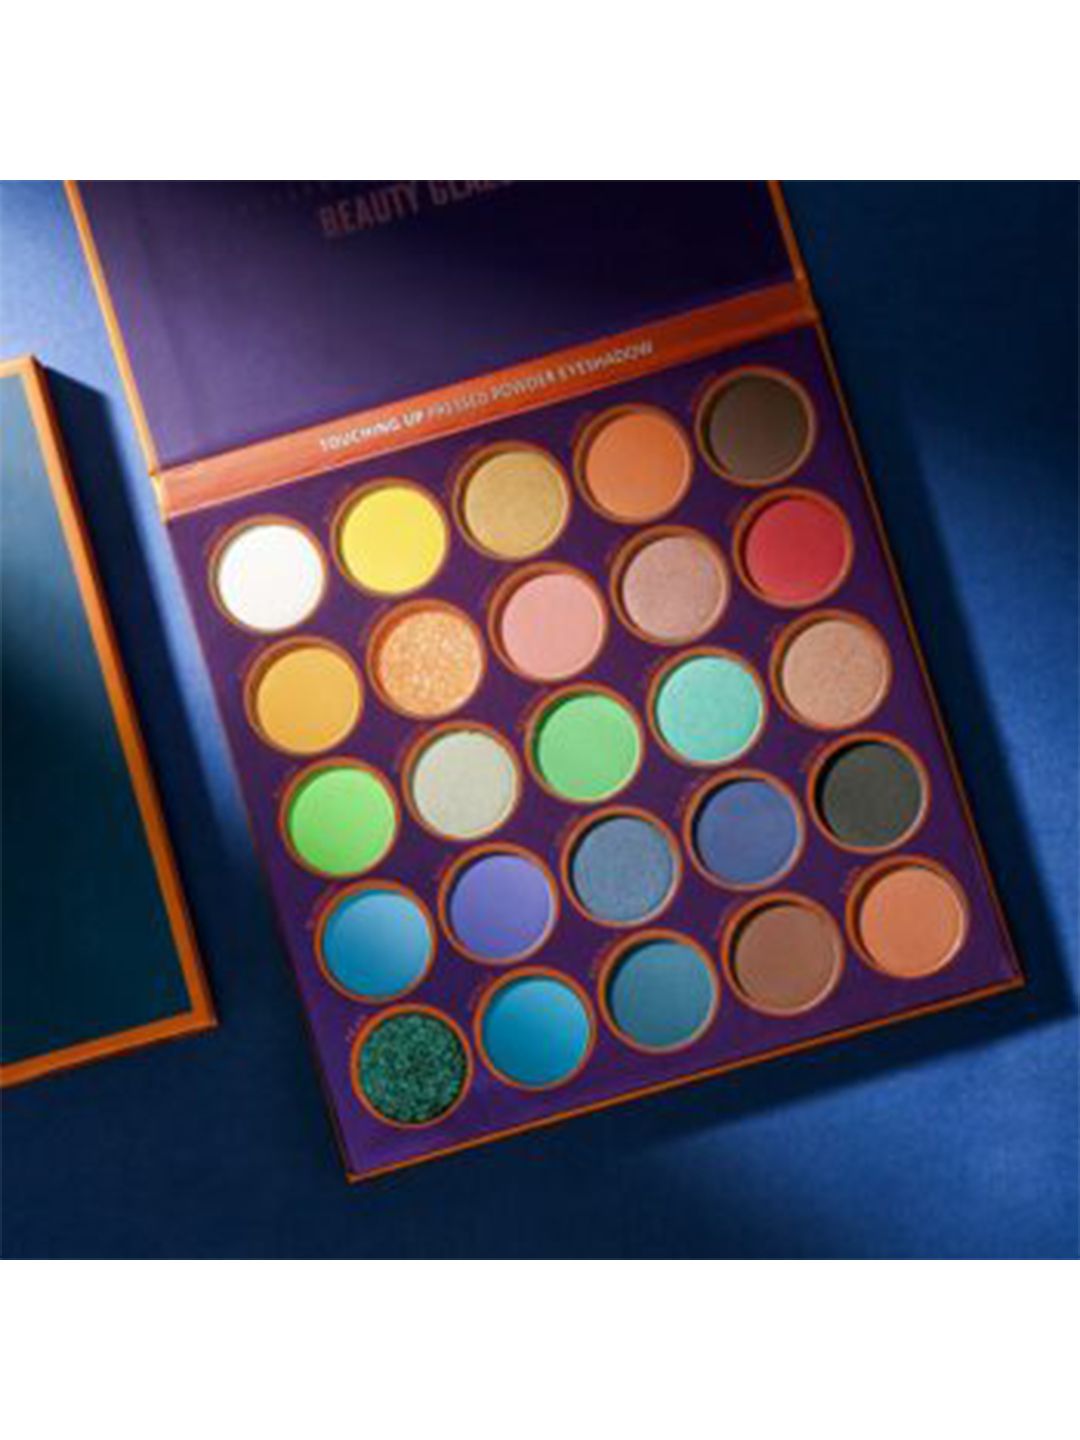 BEAUTY GLAZED Touching UP 25 Color Eyeshadow Palette - B87-A Price in India